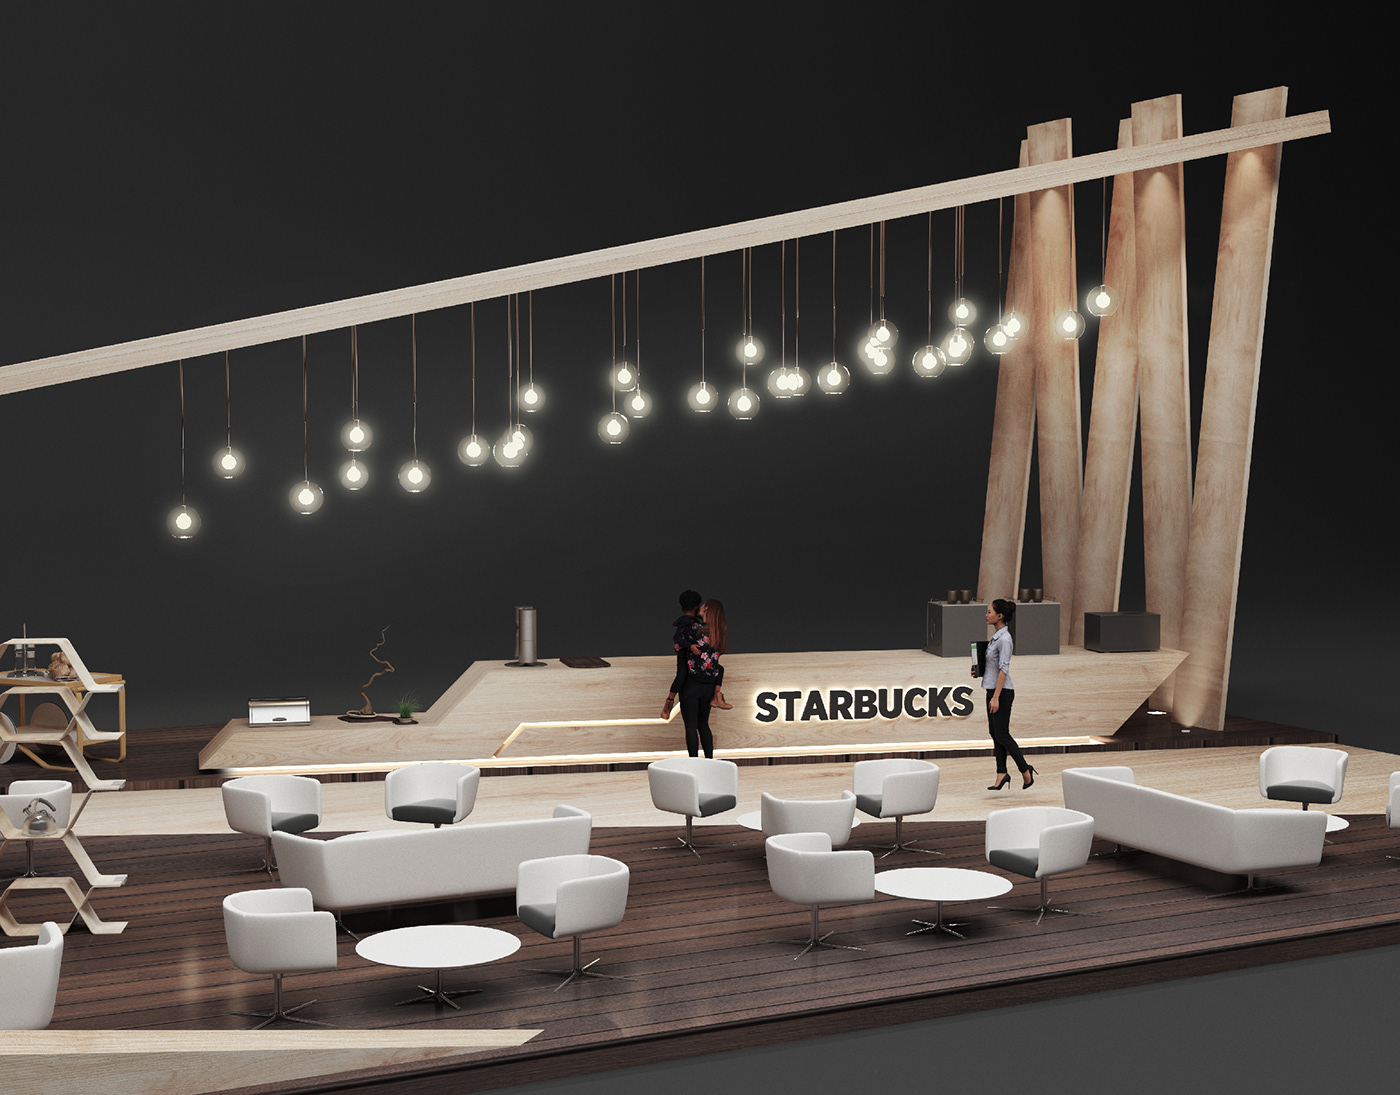 3dmax activation booth Coffee mall networking socializing working area